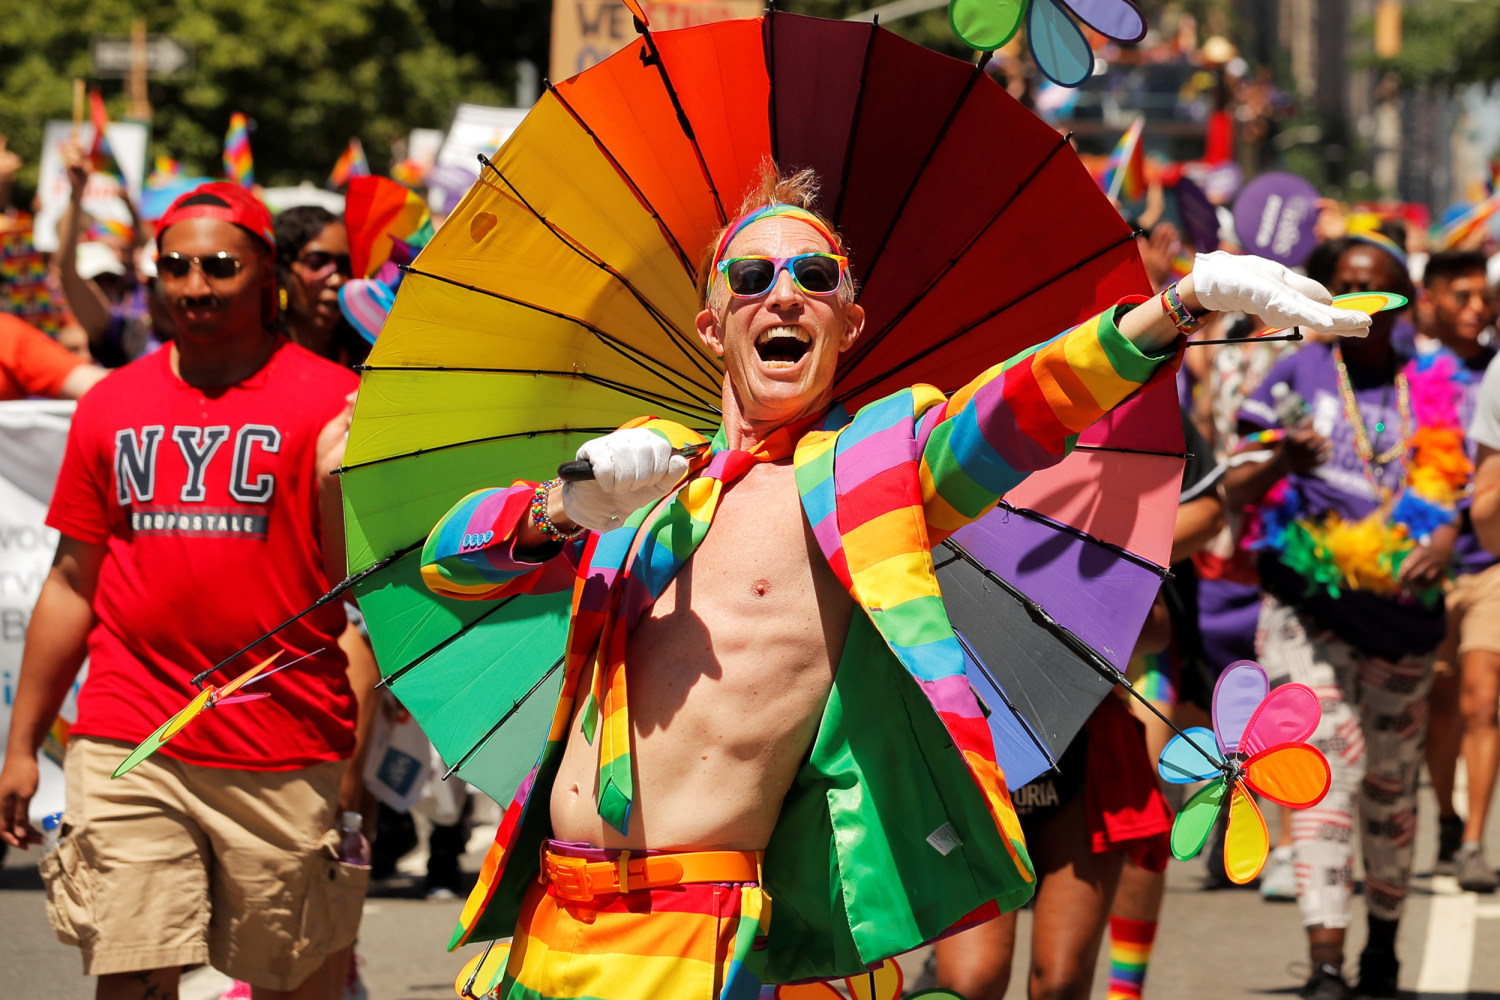 69 New York Gay Pride On Display During Annual Parade Stock Photos